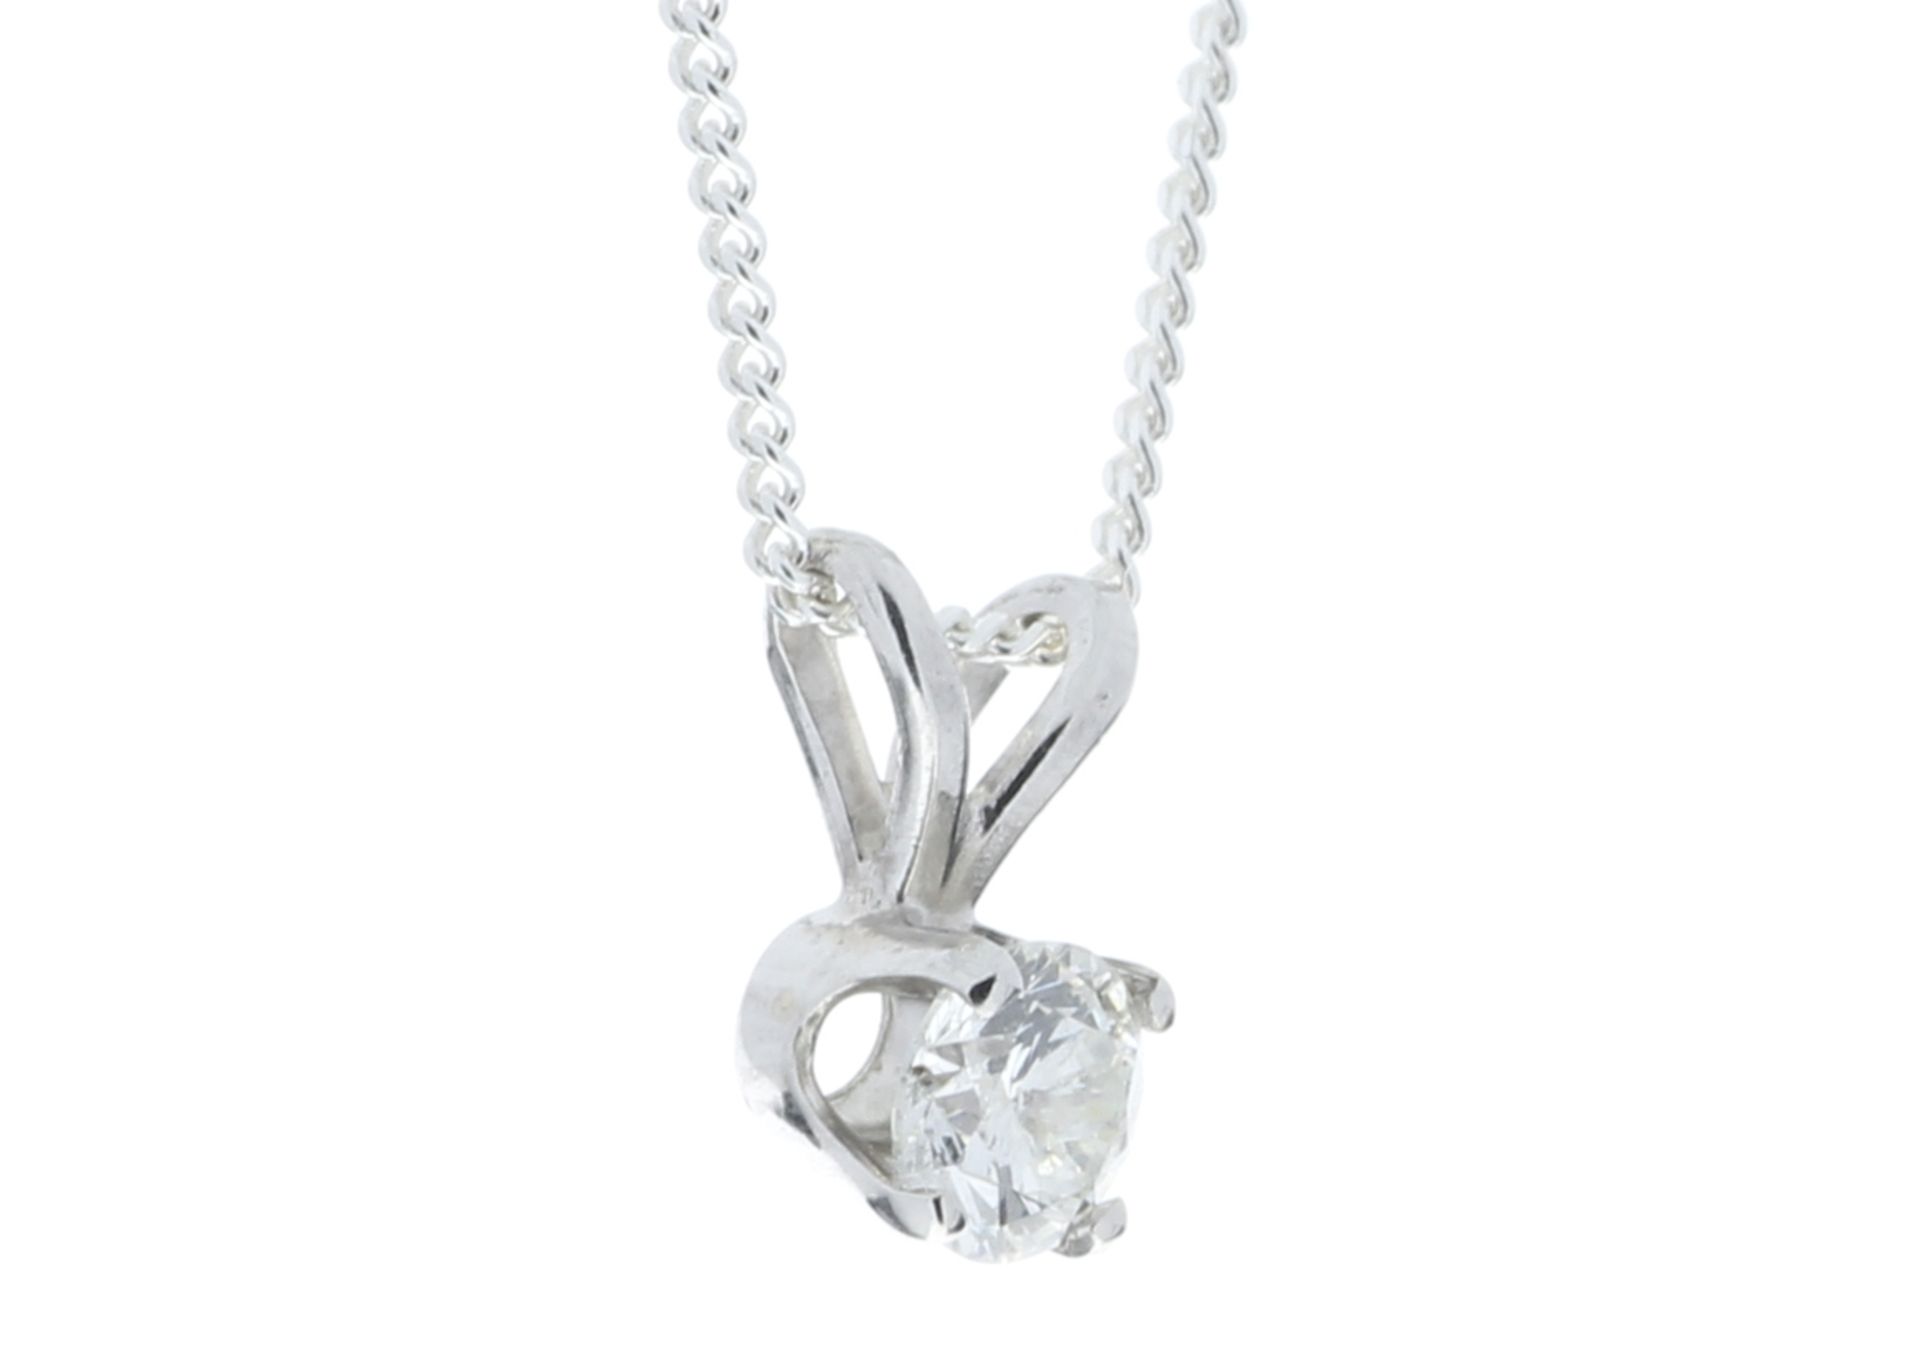 9ct White Gold Single Stone Claw Set Diamond Pendant 0.20 Carats - Valued by GIE £2,781.00 - 9ct - Image 2 of 6